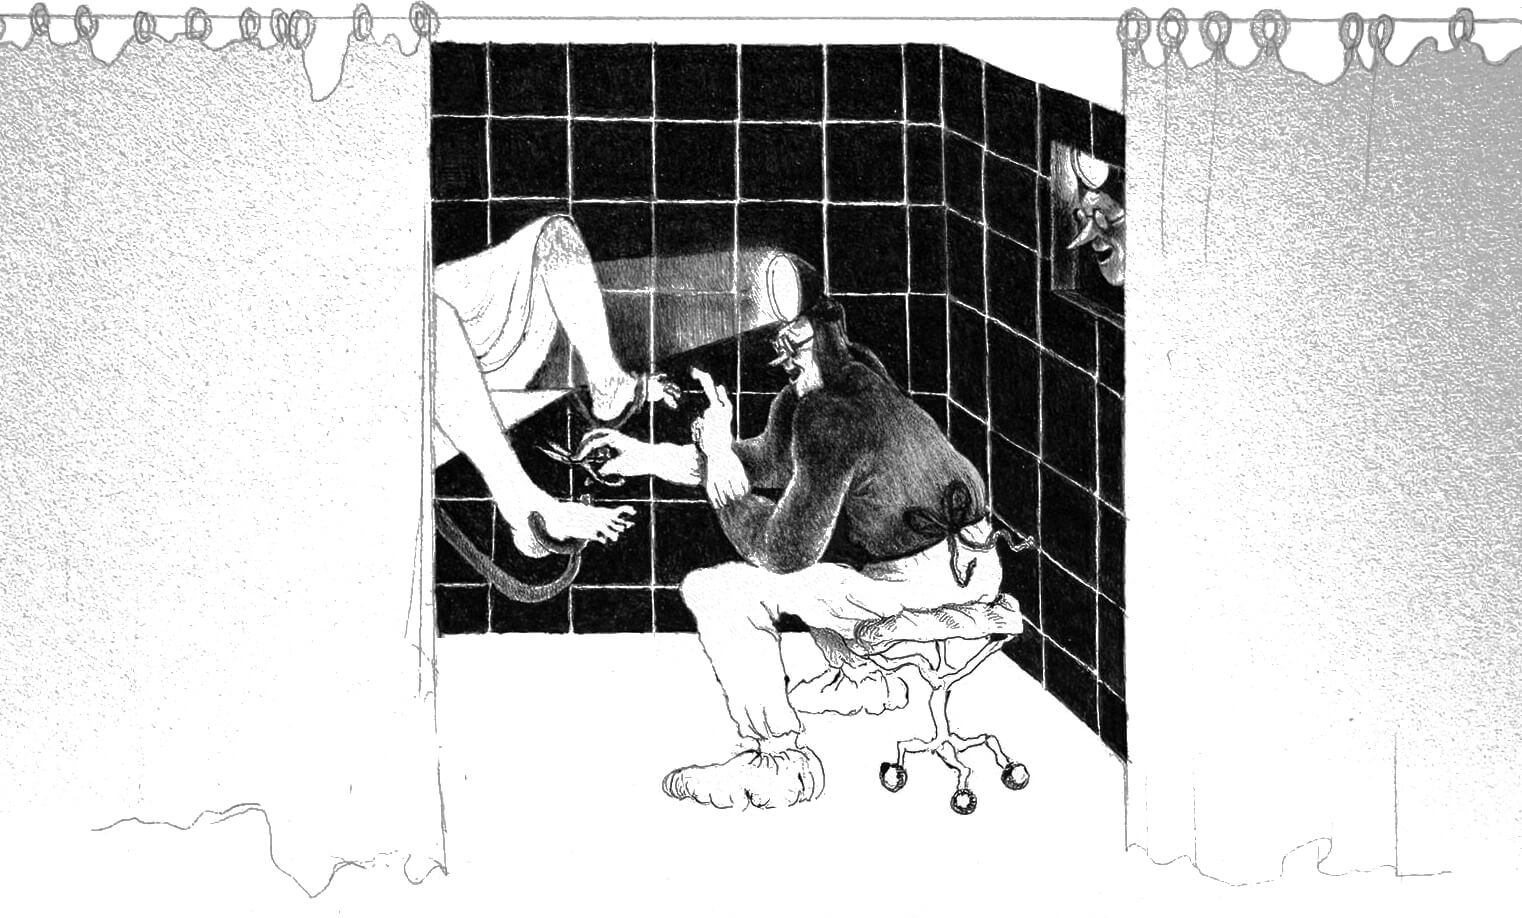 Scene 3:
We’re viewing the room from farther away, between tall curtains that spread to reveal dark tiled walls and the doctor sitting on a three-legged stool. 

The x-ray widget reveals the left side of the image, where the patient seems to float, obscured by the curtain but for their feet in metal stirrups. The doctor brandishes a cutting instrument and gestures with one finger toward the patient’s open legs. No, no.
 
On the right is the same small window and identical grinning doctor, his glasses reflecting the room’s clinical light. 